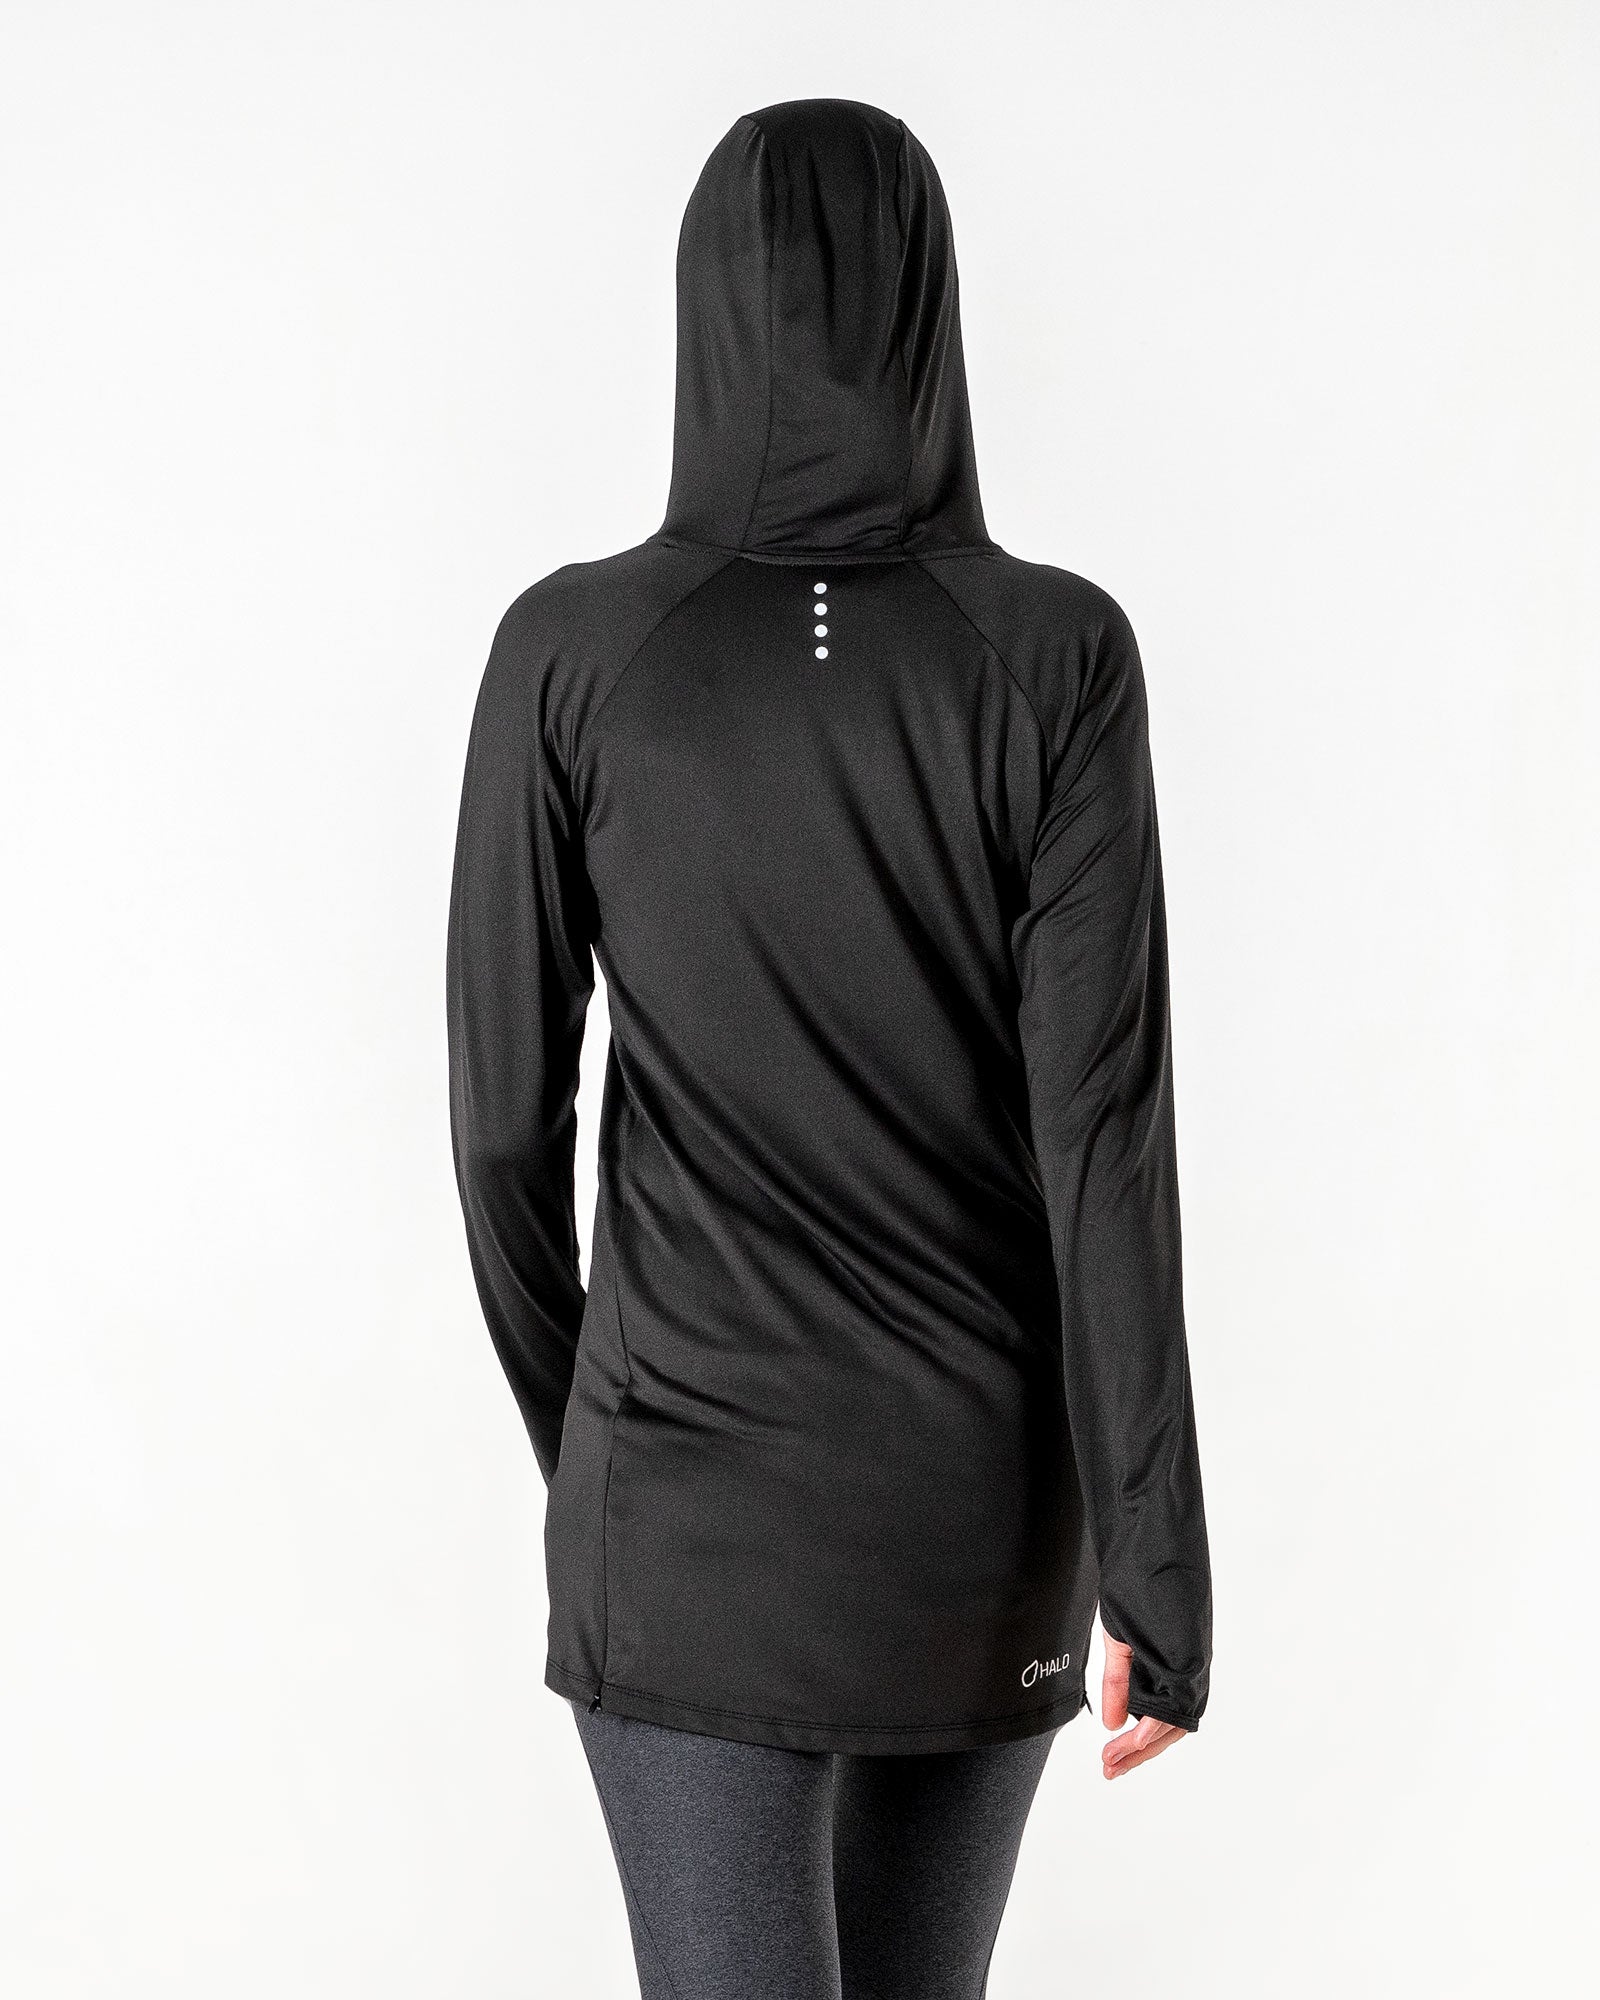 Halo Running Hoodie in black by Veil Garments. Modest activewear collection.